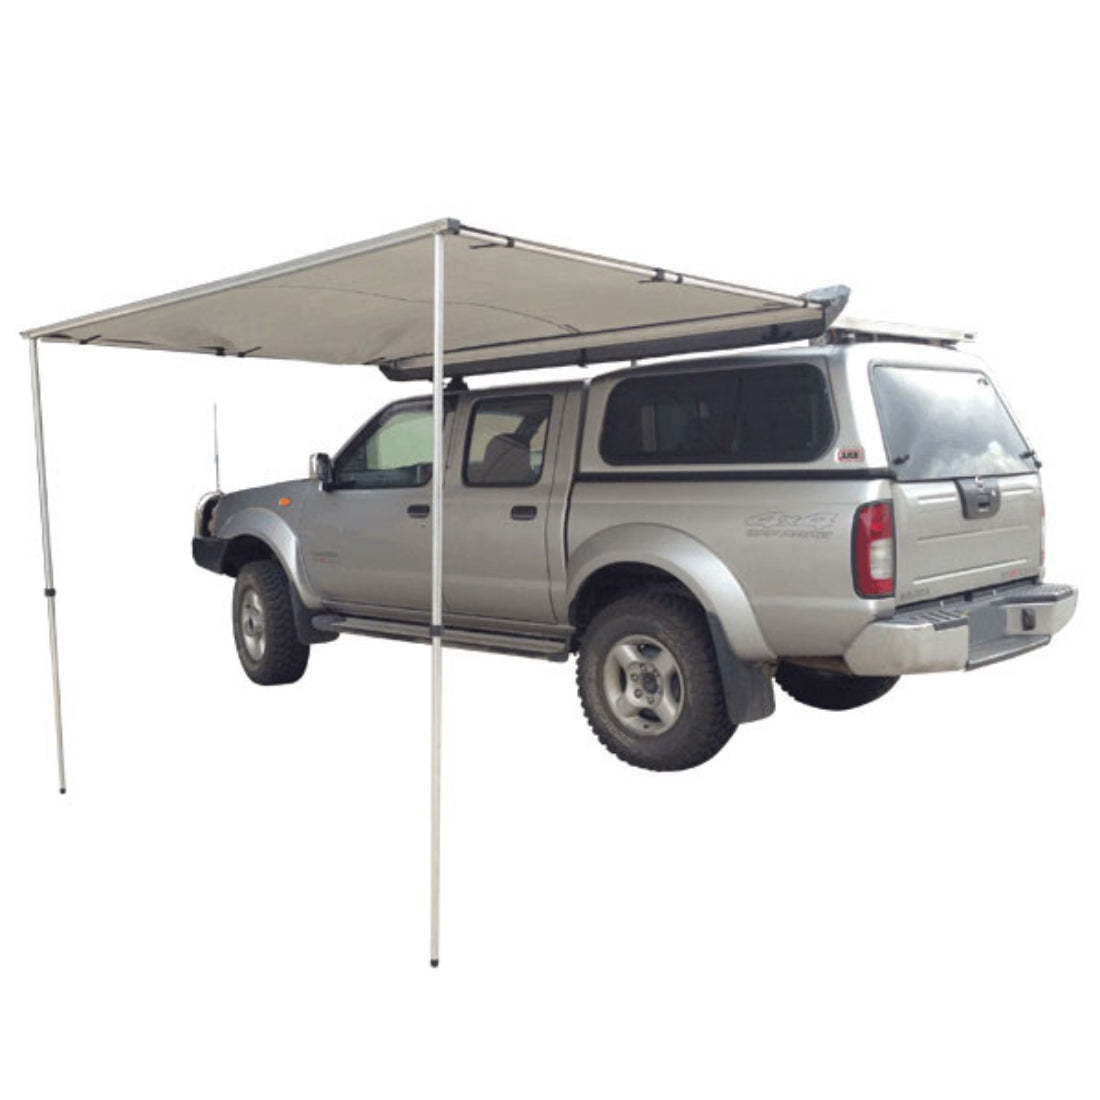 2.5m x 2m Pull Out Car Awning Shade Waterproof 4WD